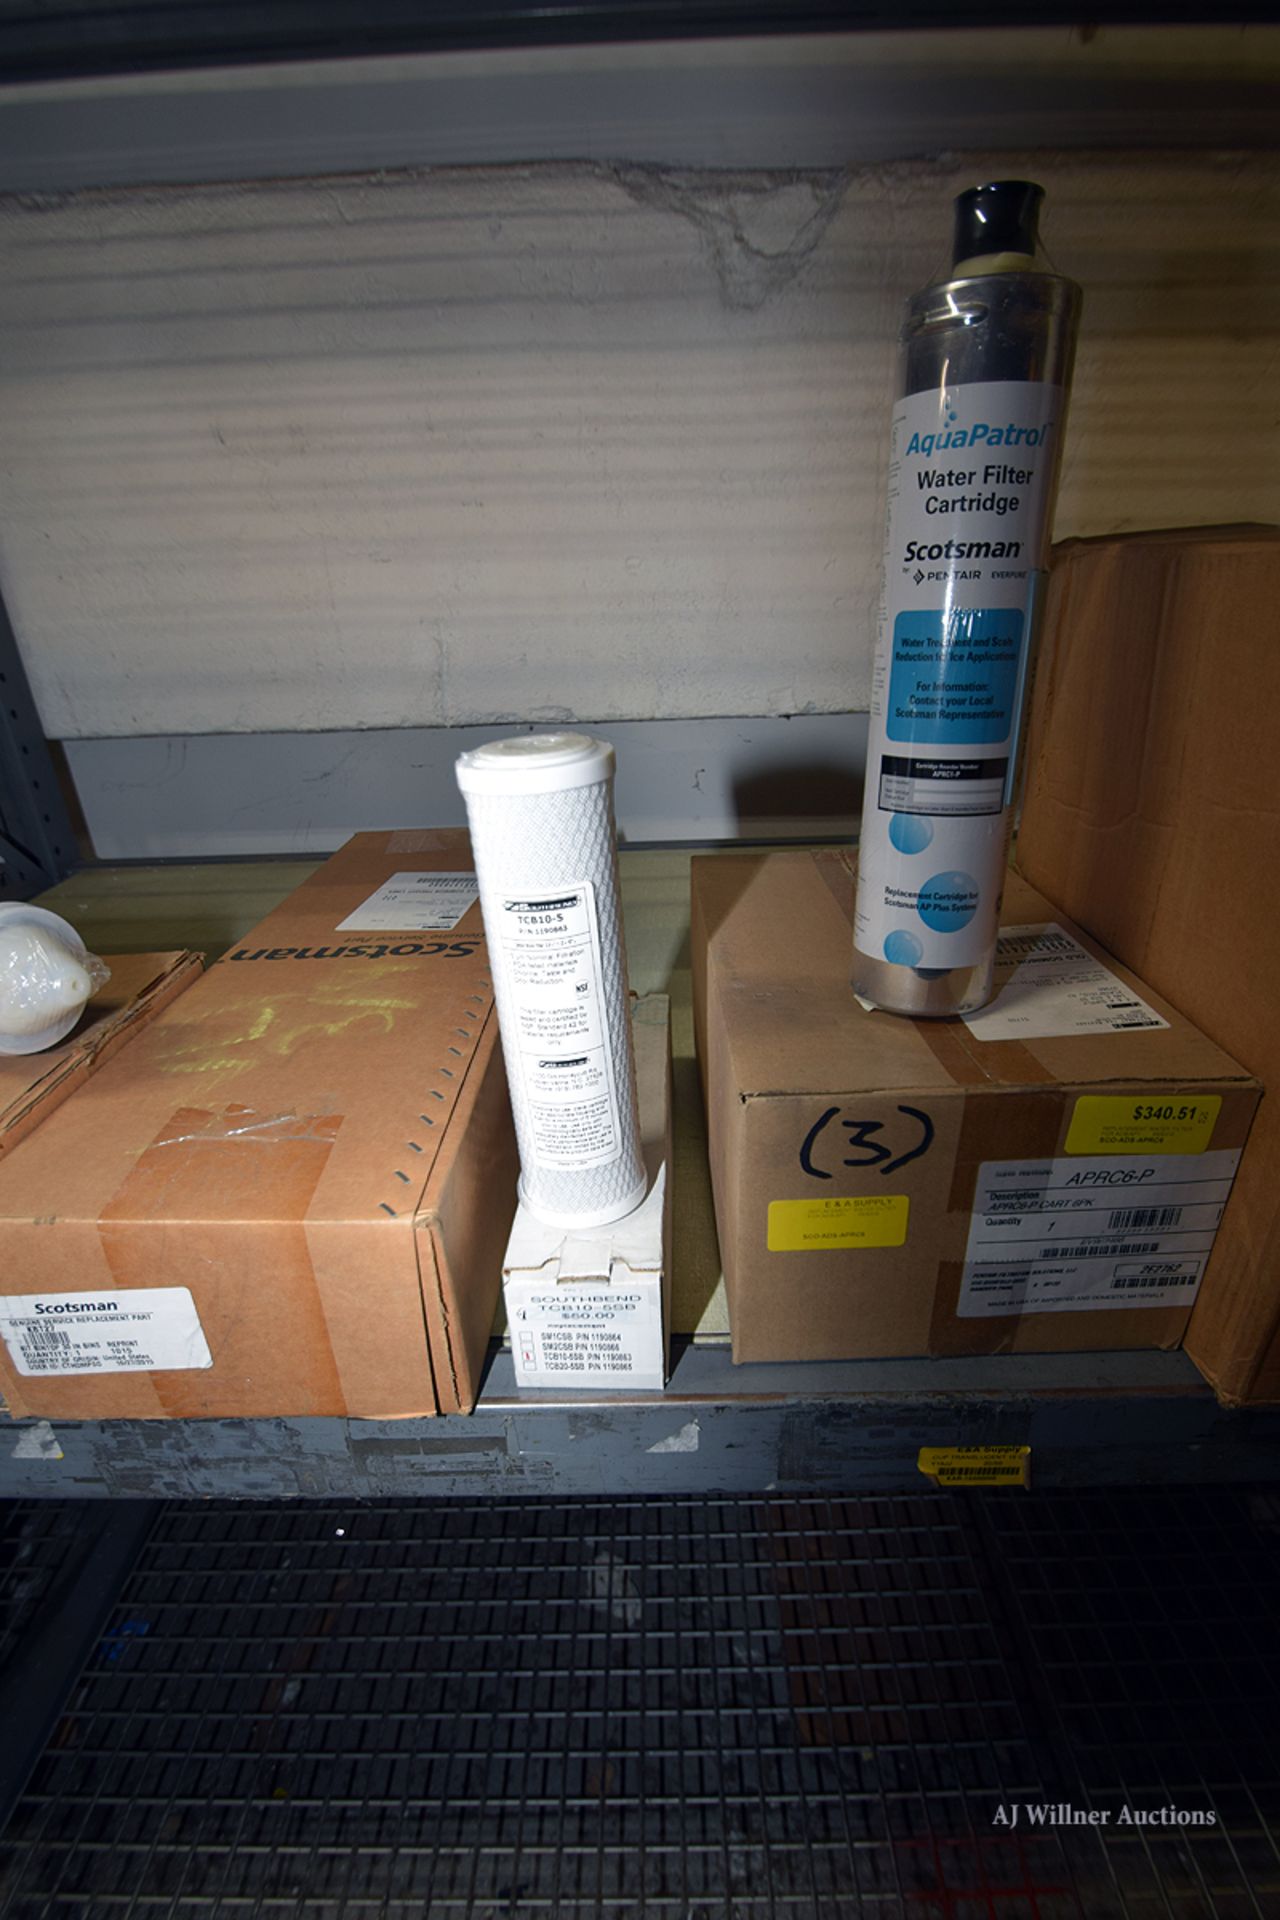 Scotsman, Aqua Patrol, Southbend Water Filters - Image 4 of 7